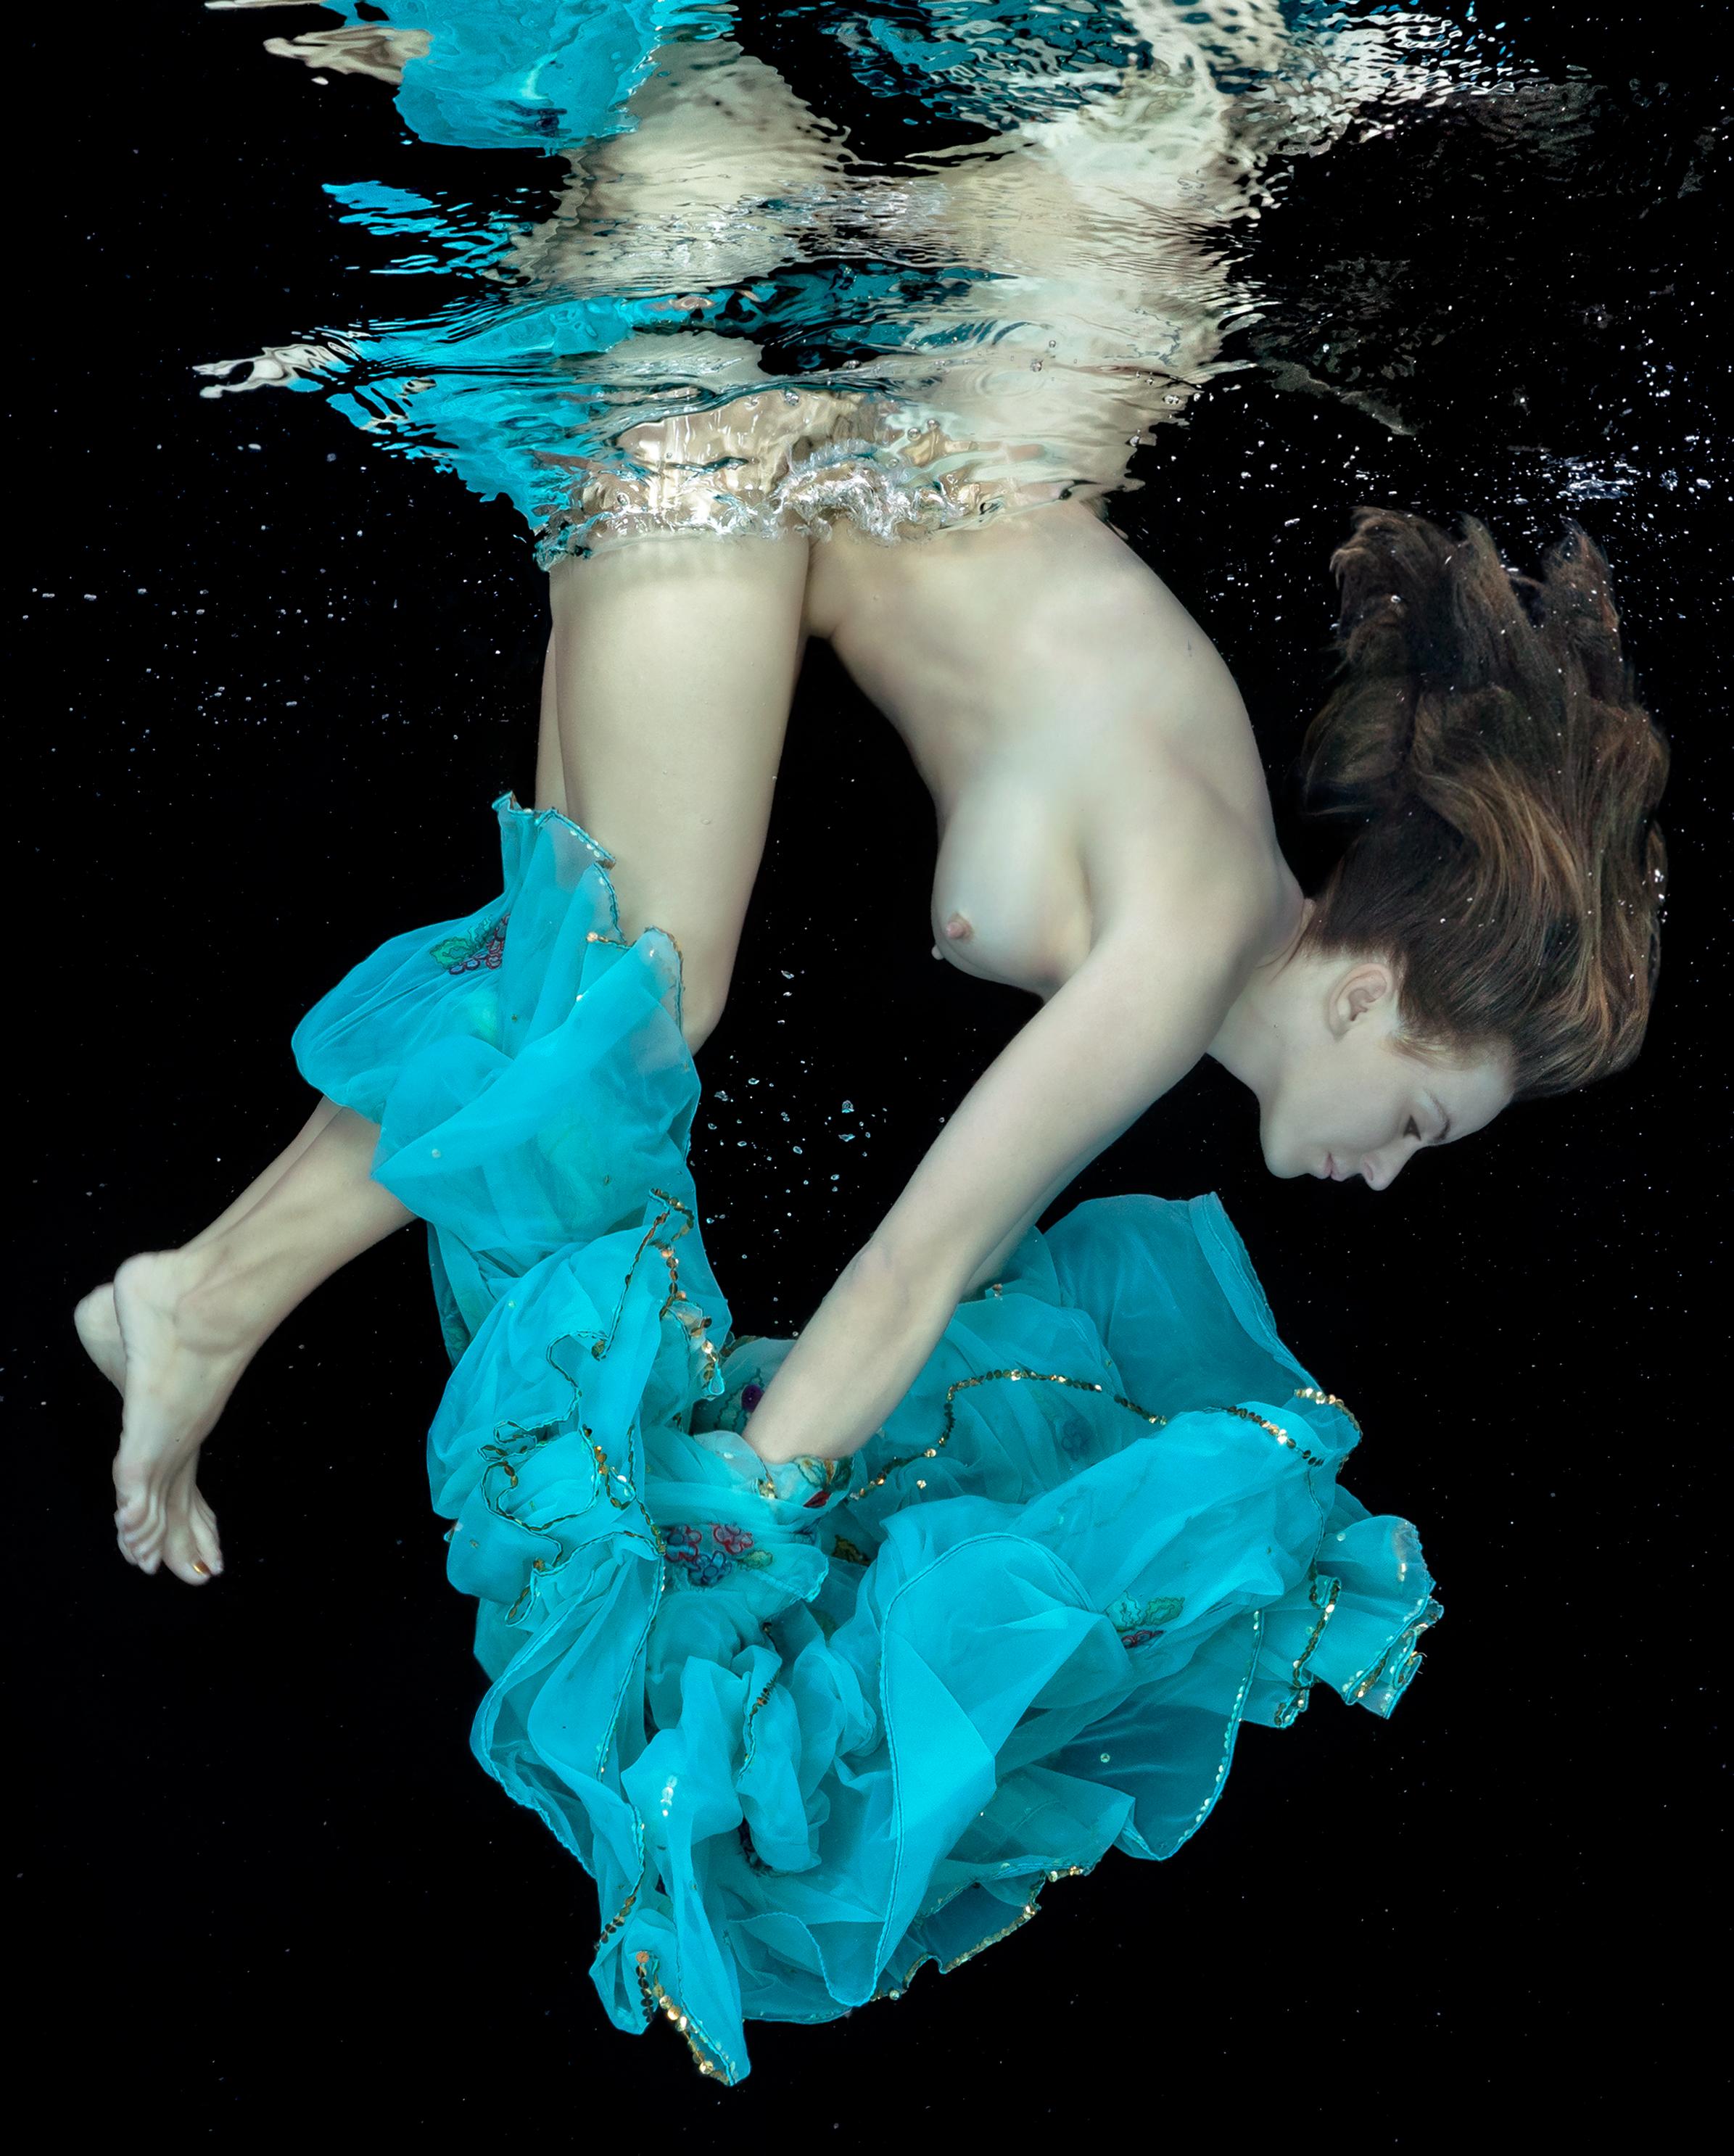 Porcelain and Тurquoise - underwater nude photograph - archival pigment 35x26